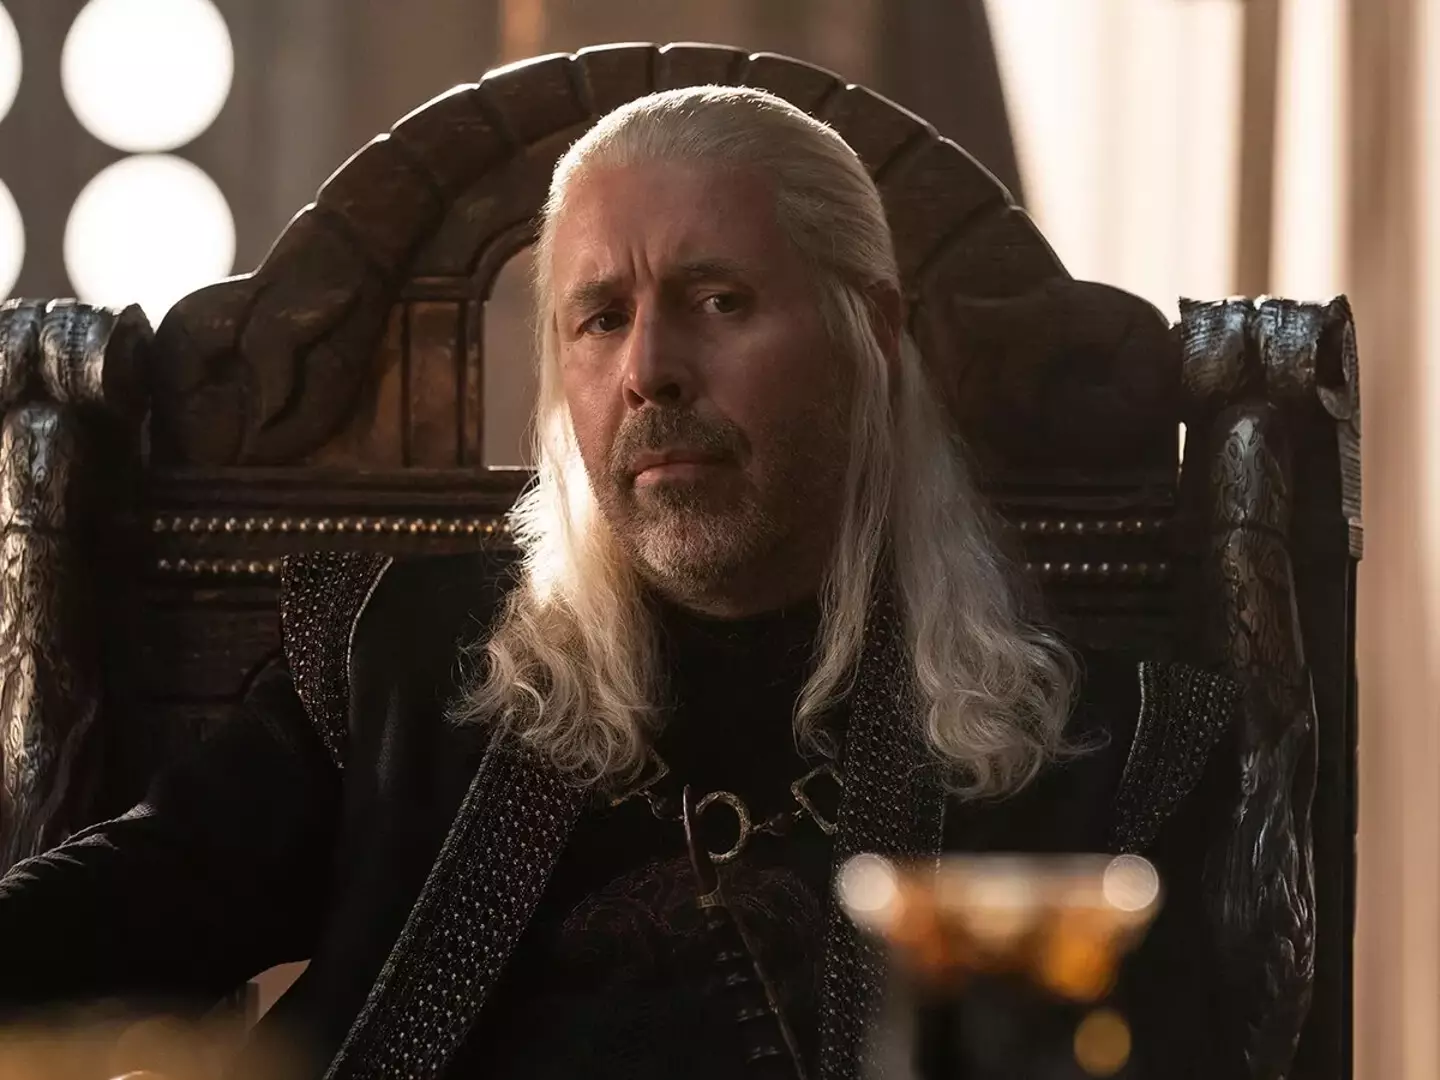 Her husband Viserys (Paddy Considine) was naturally distraught.